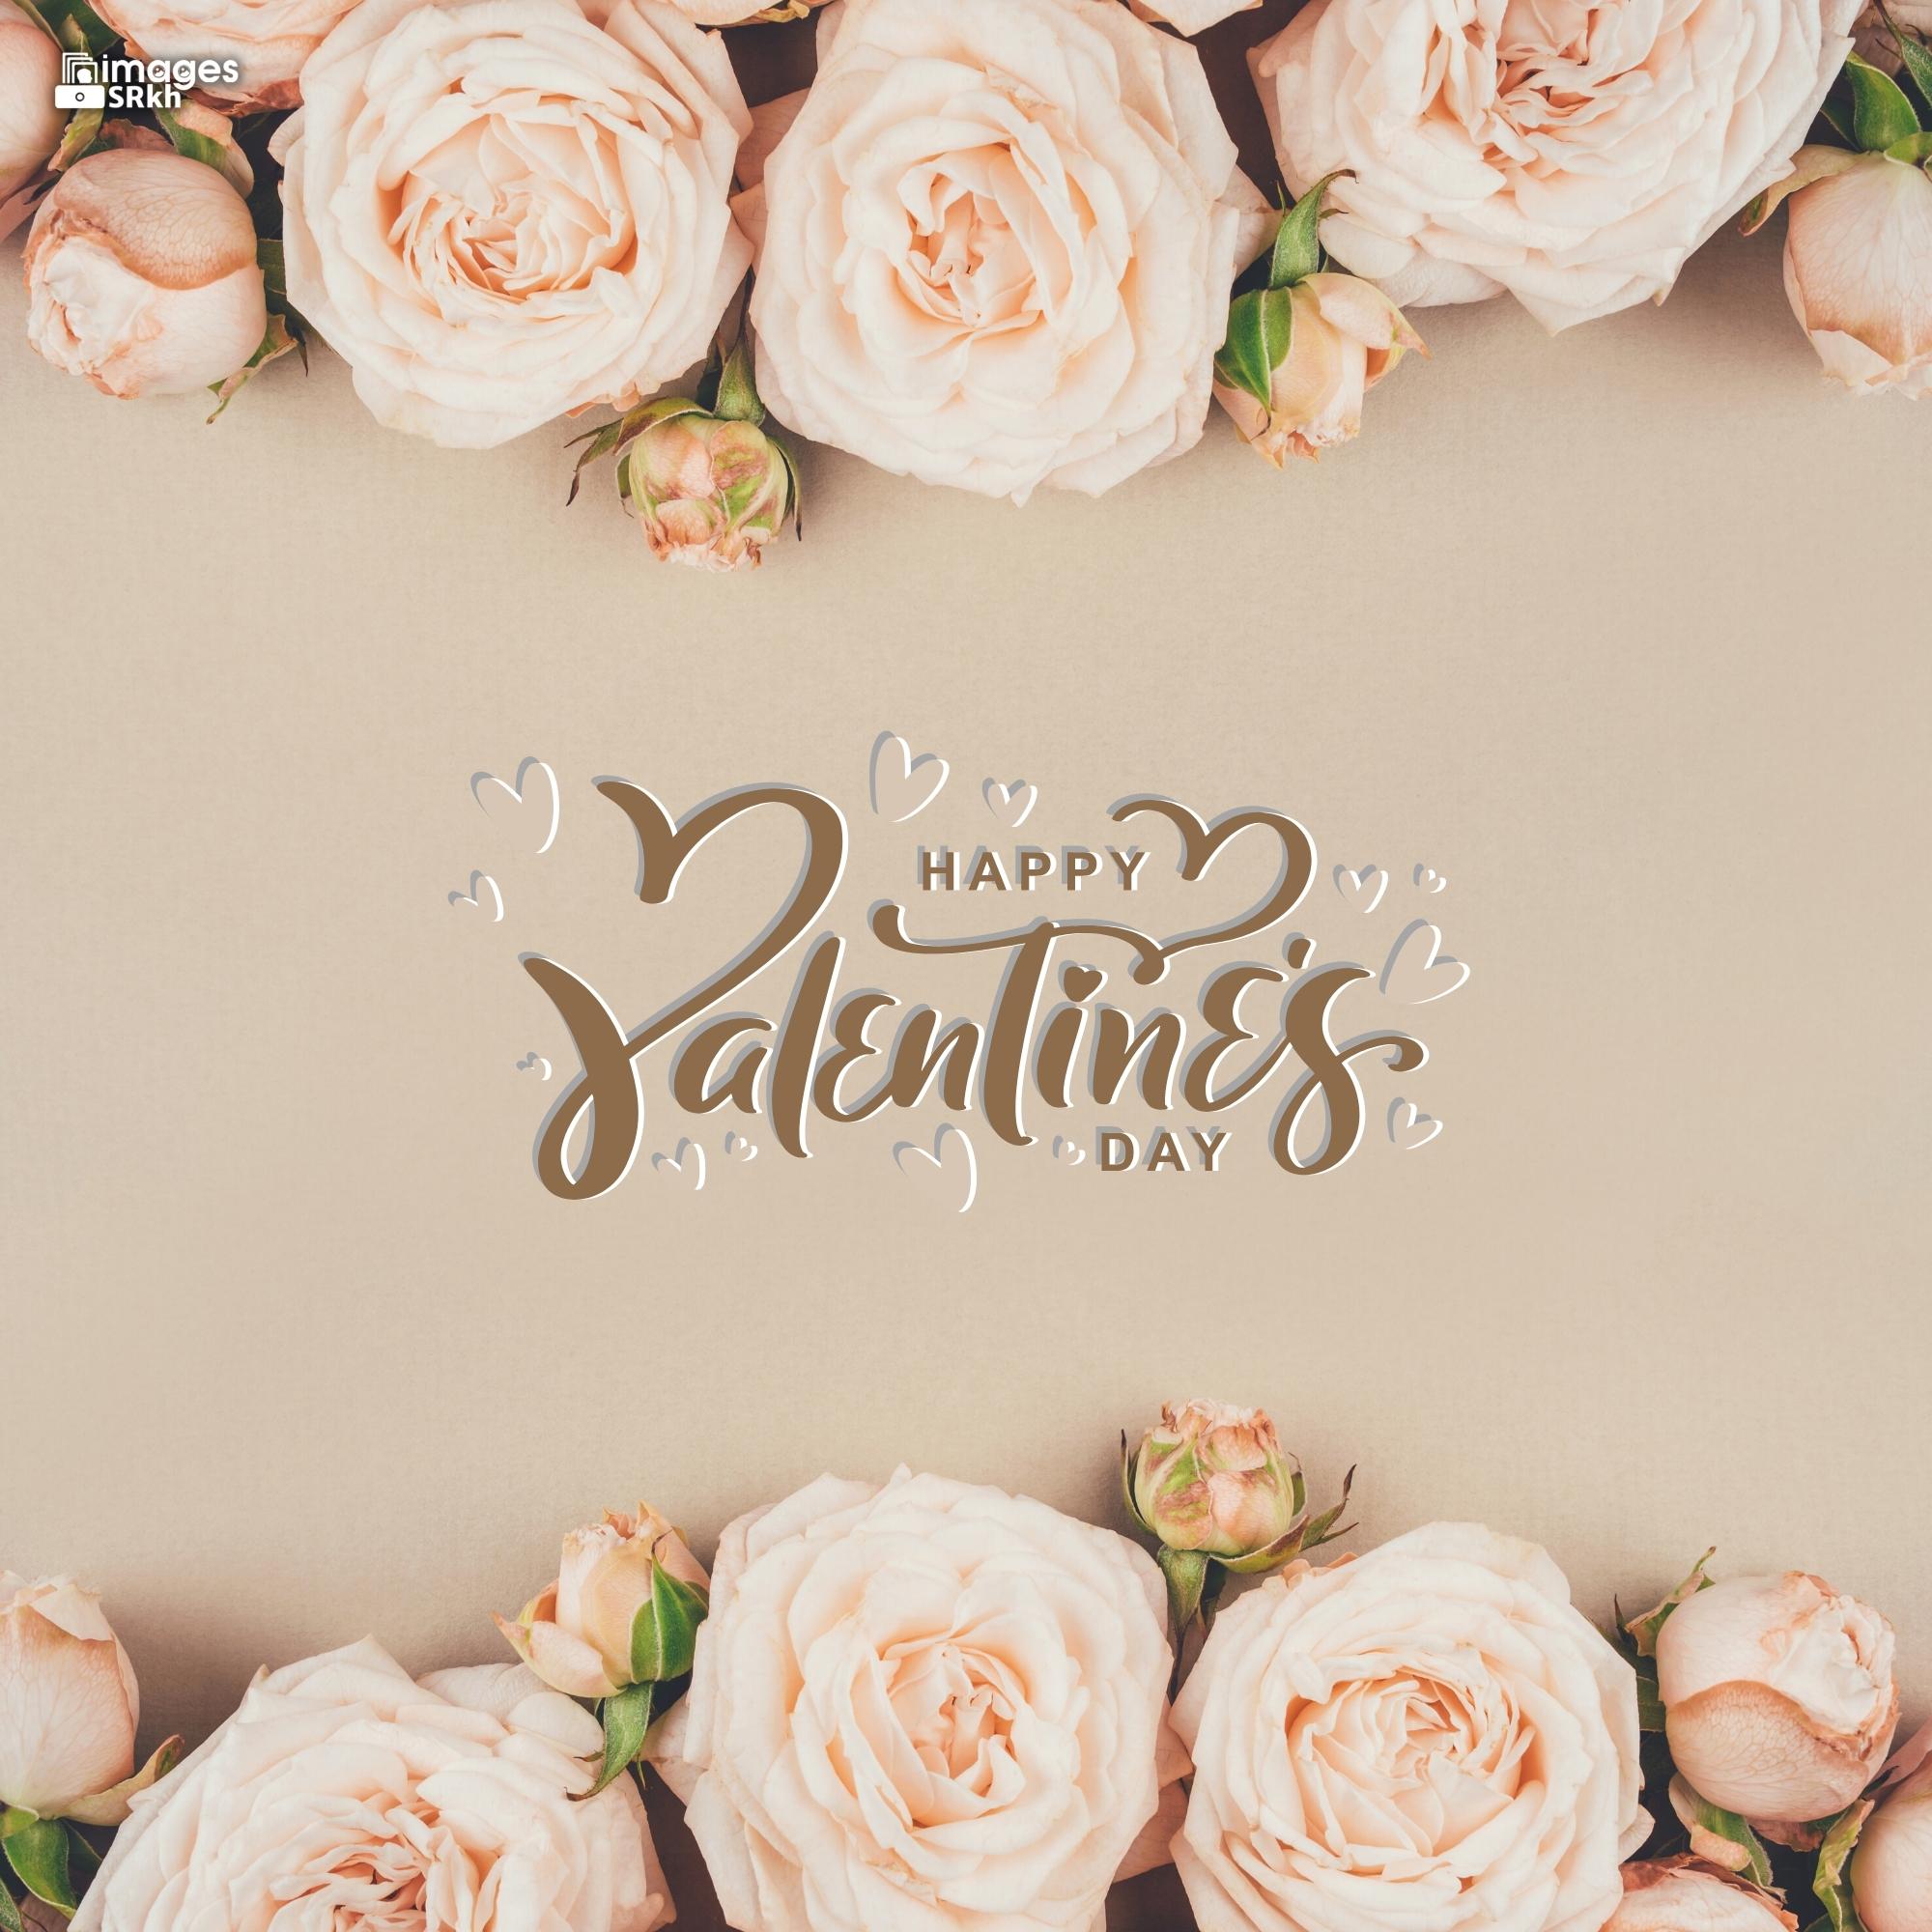 Happy Valentines Day | 438 | PREMIUM IMAGES | Wishes for Love